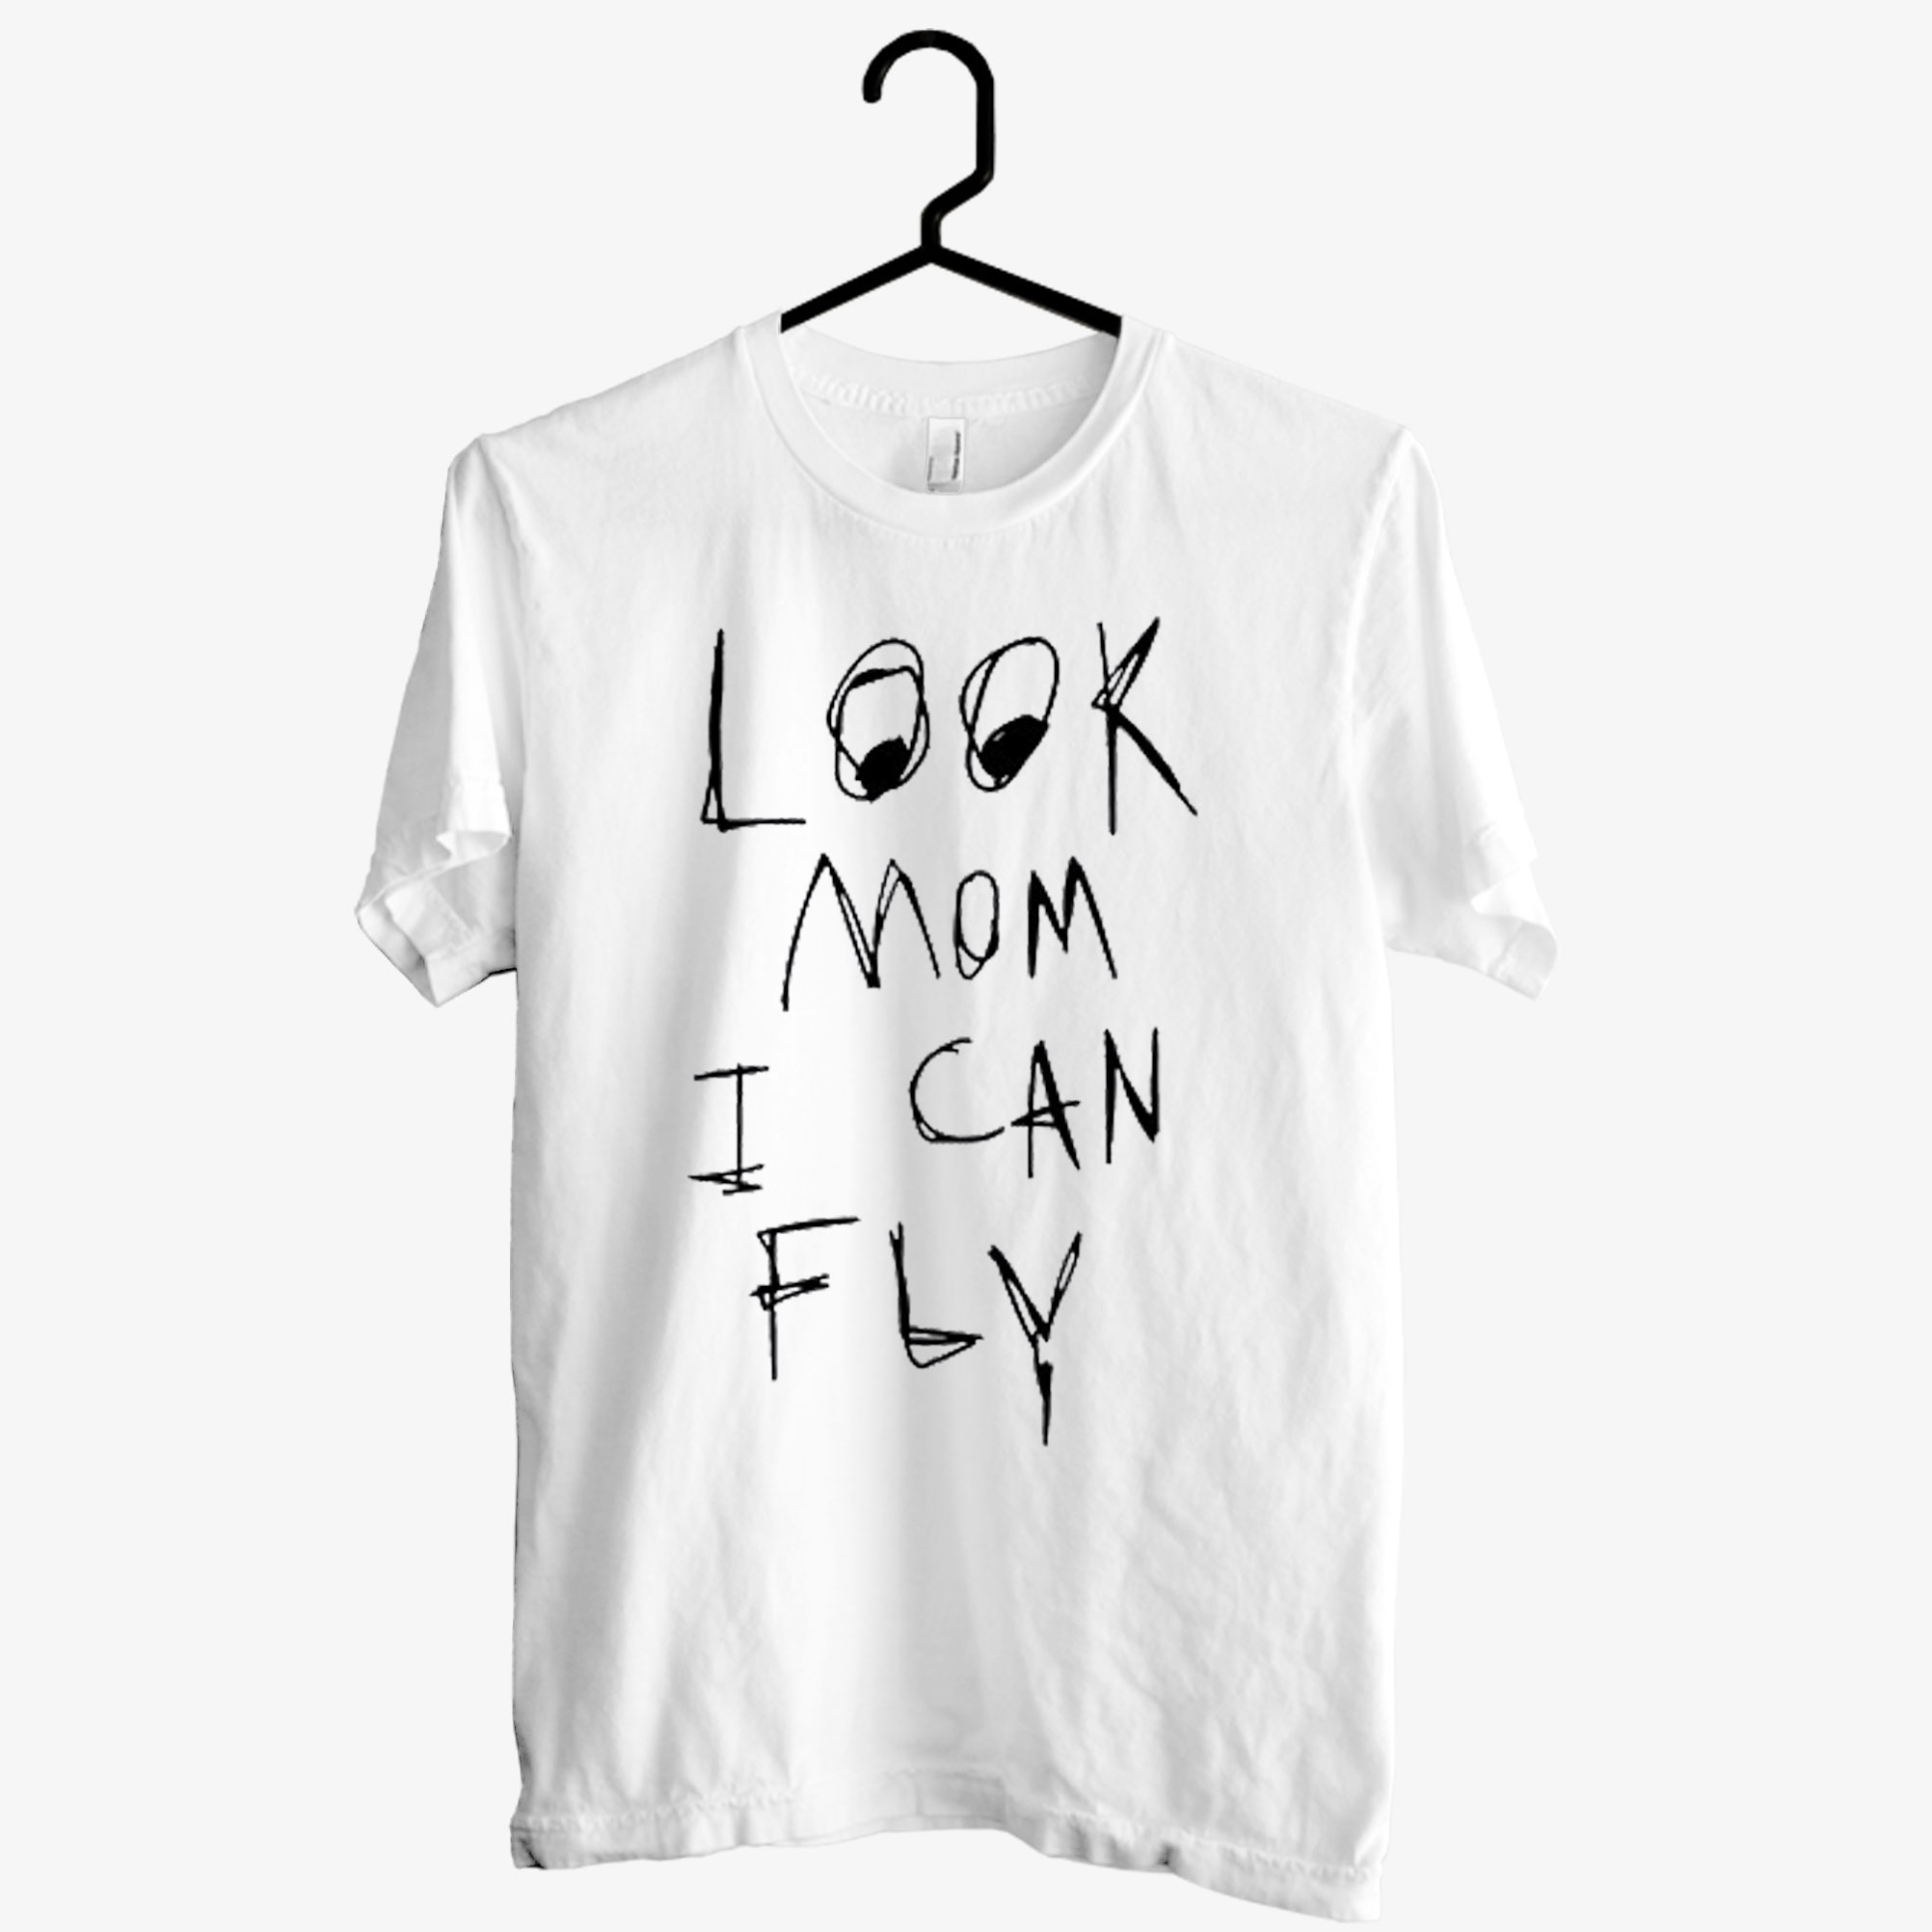 Look Mom I Can Fly-T-shirt for Men and Womens – SlothCloth